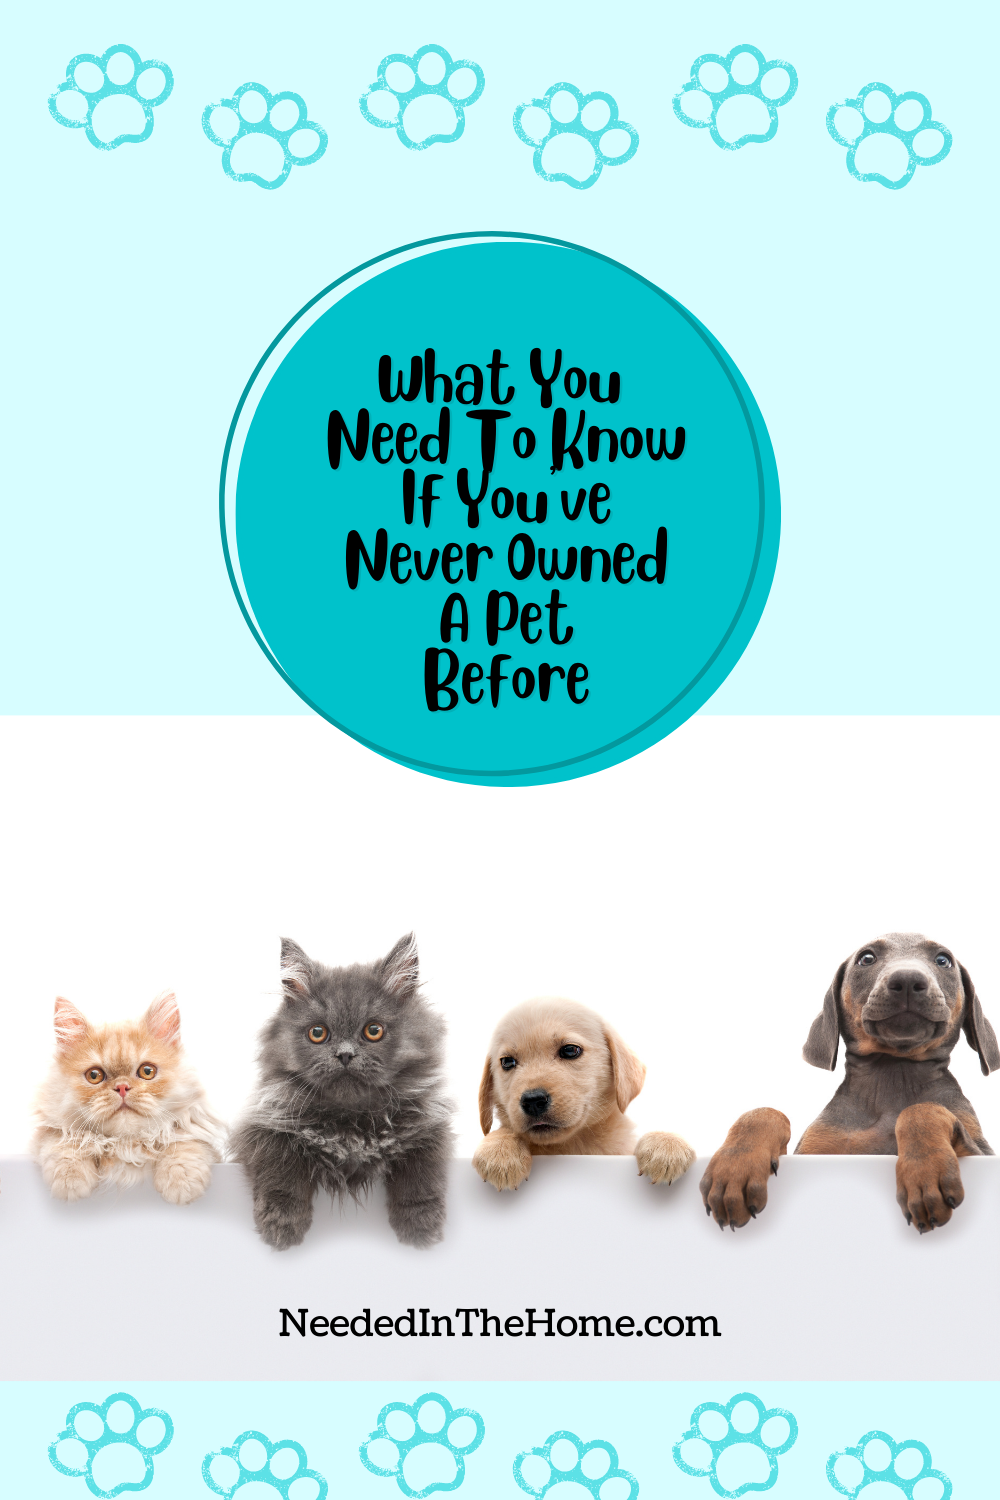 pinterest-pin-description what you need to know if you've never owned a pet before kittens puppies paw prints neededinthehome